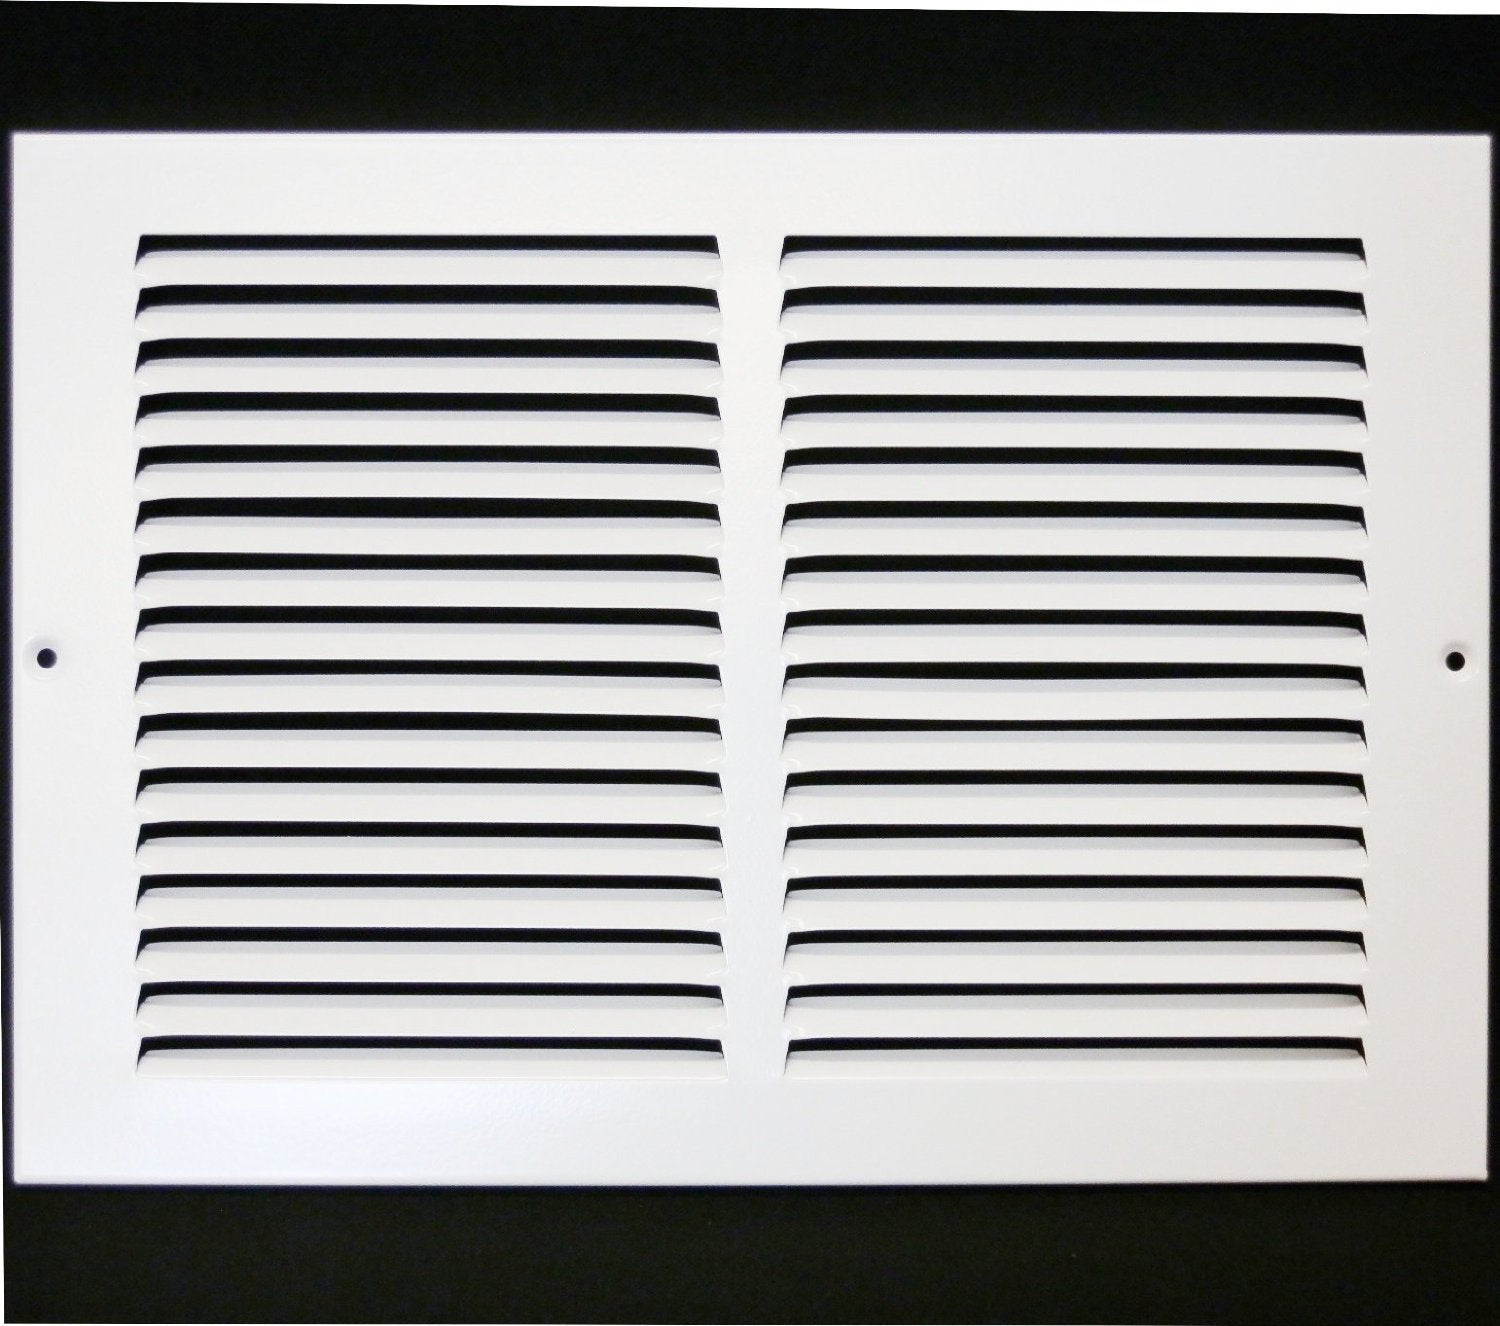 8" X 4" Air Vent Return Grilles - Sidewall and Ceiling - Steel